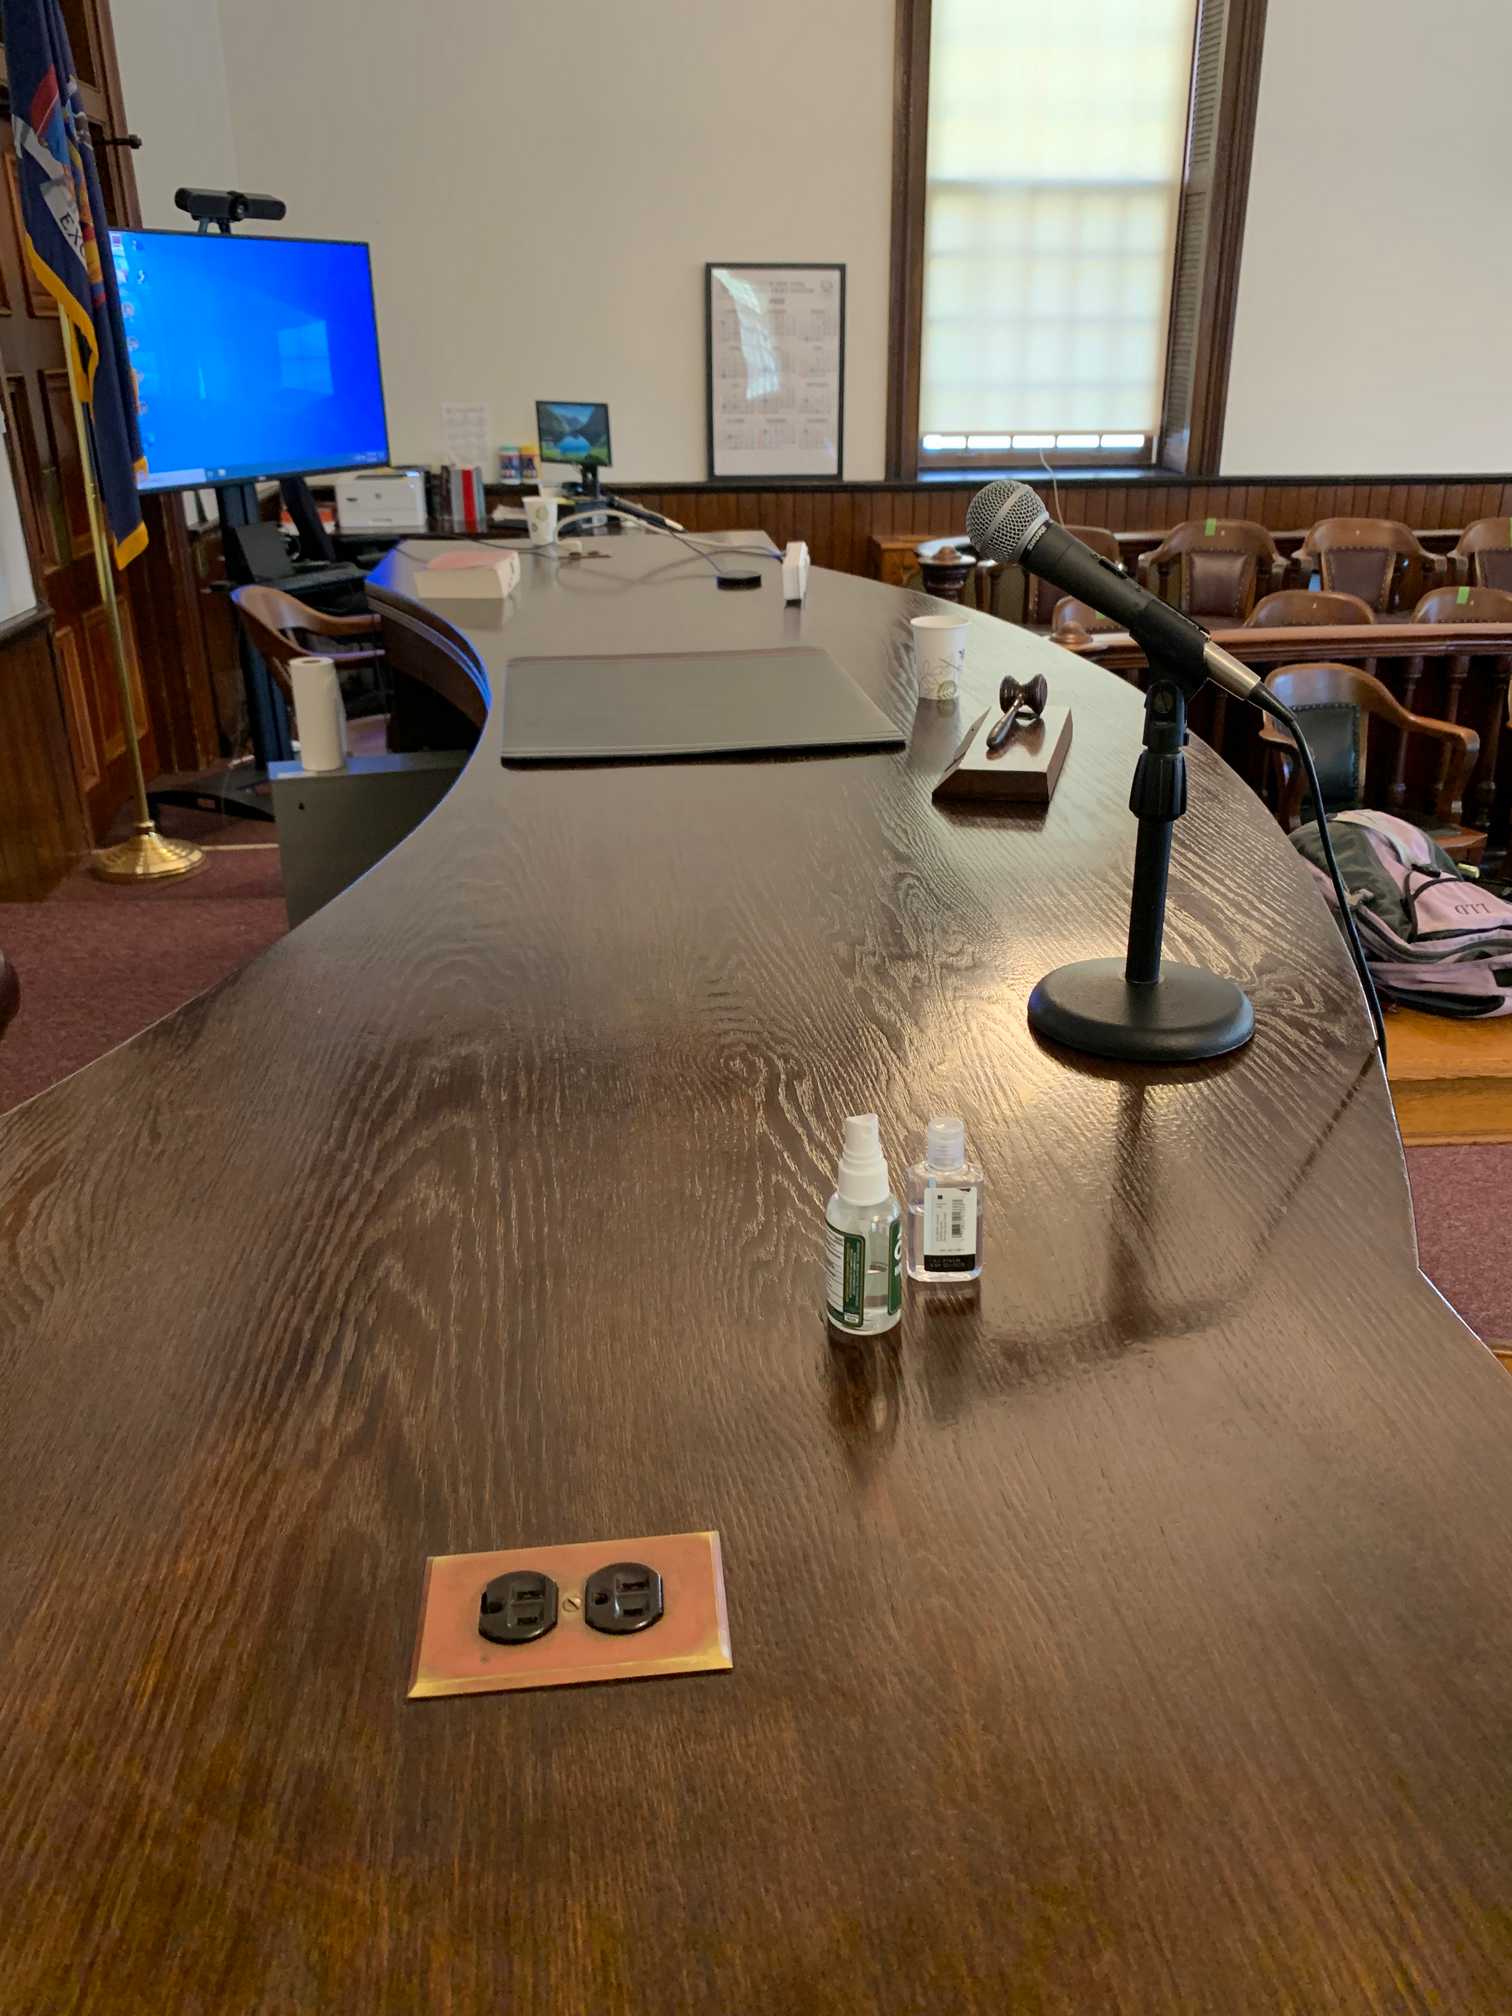 An old-fashioned courtroom with wooden furniture has been modernized with various forms of technology, but only a videoconferencing computer on a movable stand, microphones, and an outlet built into the judge's bench are visible. The picture is taken from the right side of the judge's bench, facing the left side of the bench (i.e. right and left from the perspective of the judge's bench, facing the gallery).